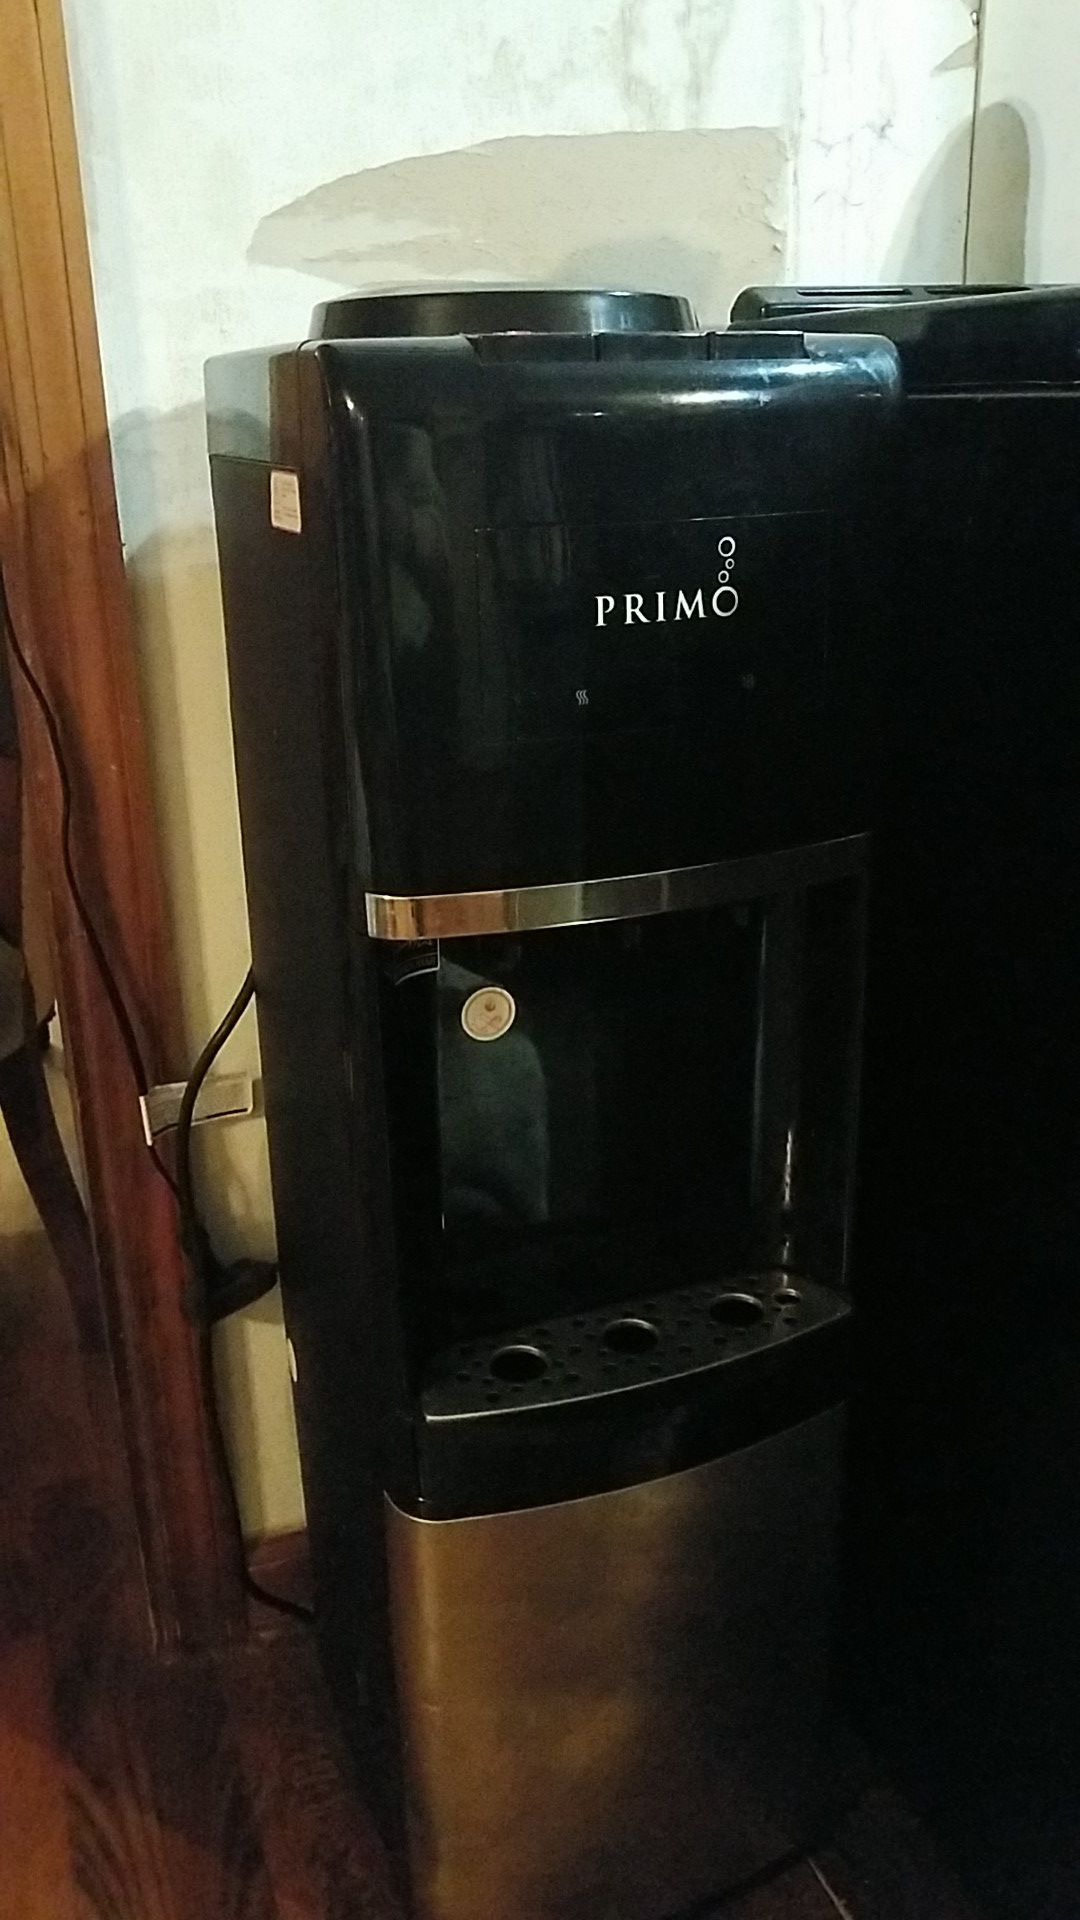 Primo water cooler/heater